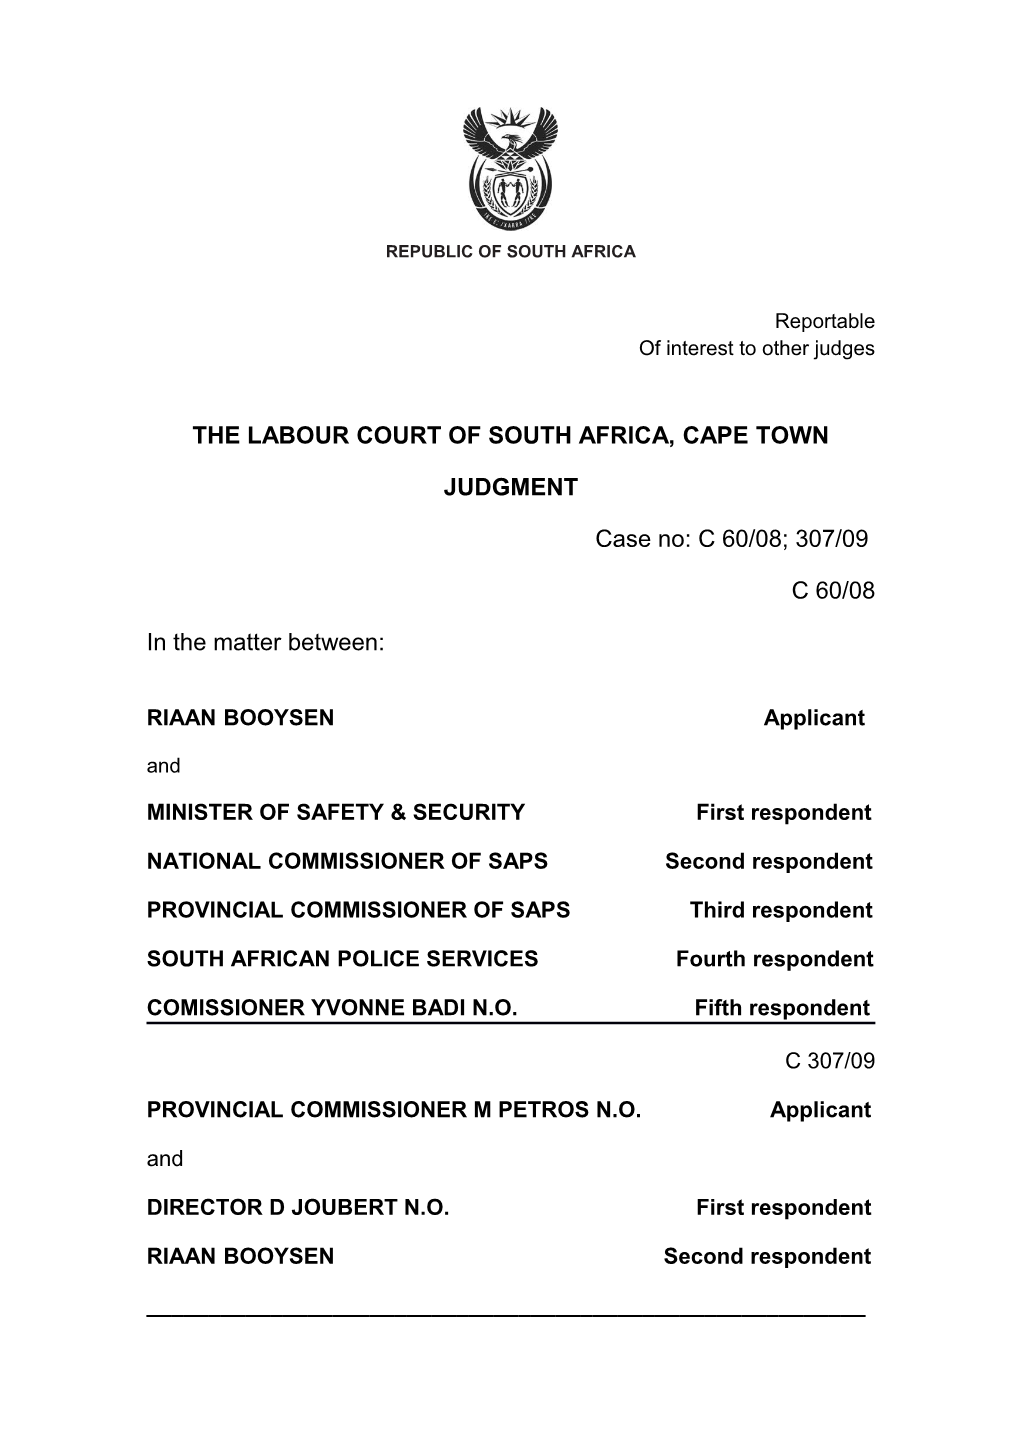 The Labour Court of South Africa, Cape Town